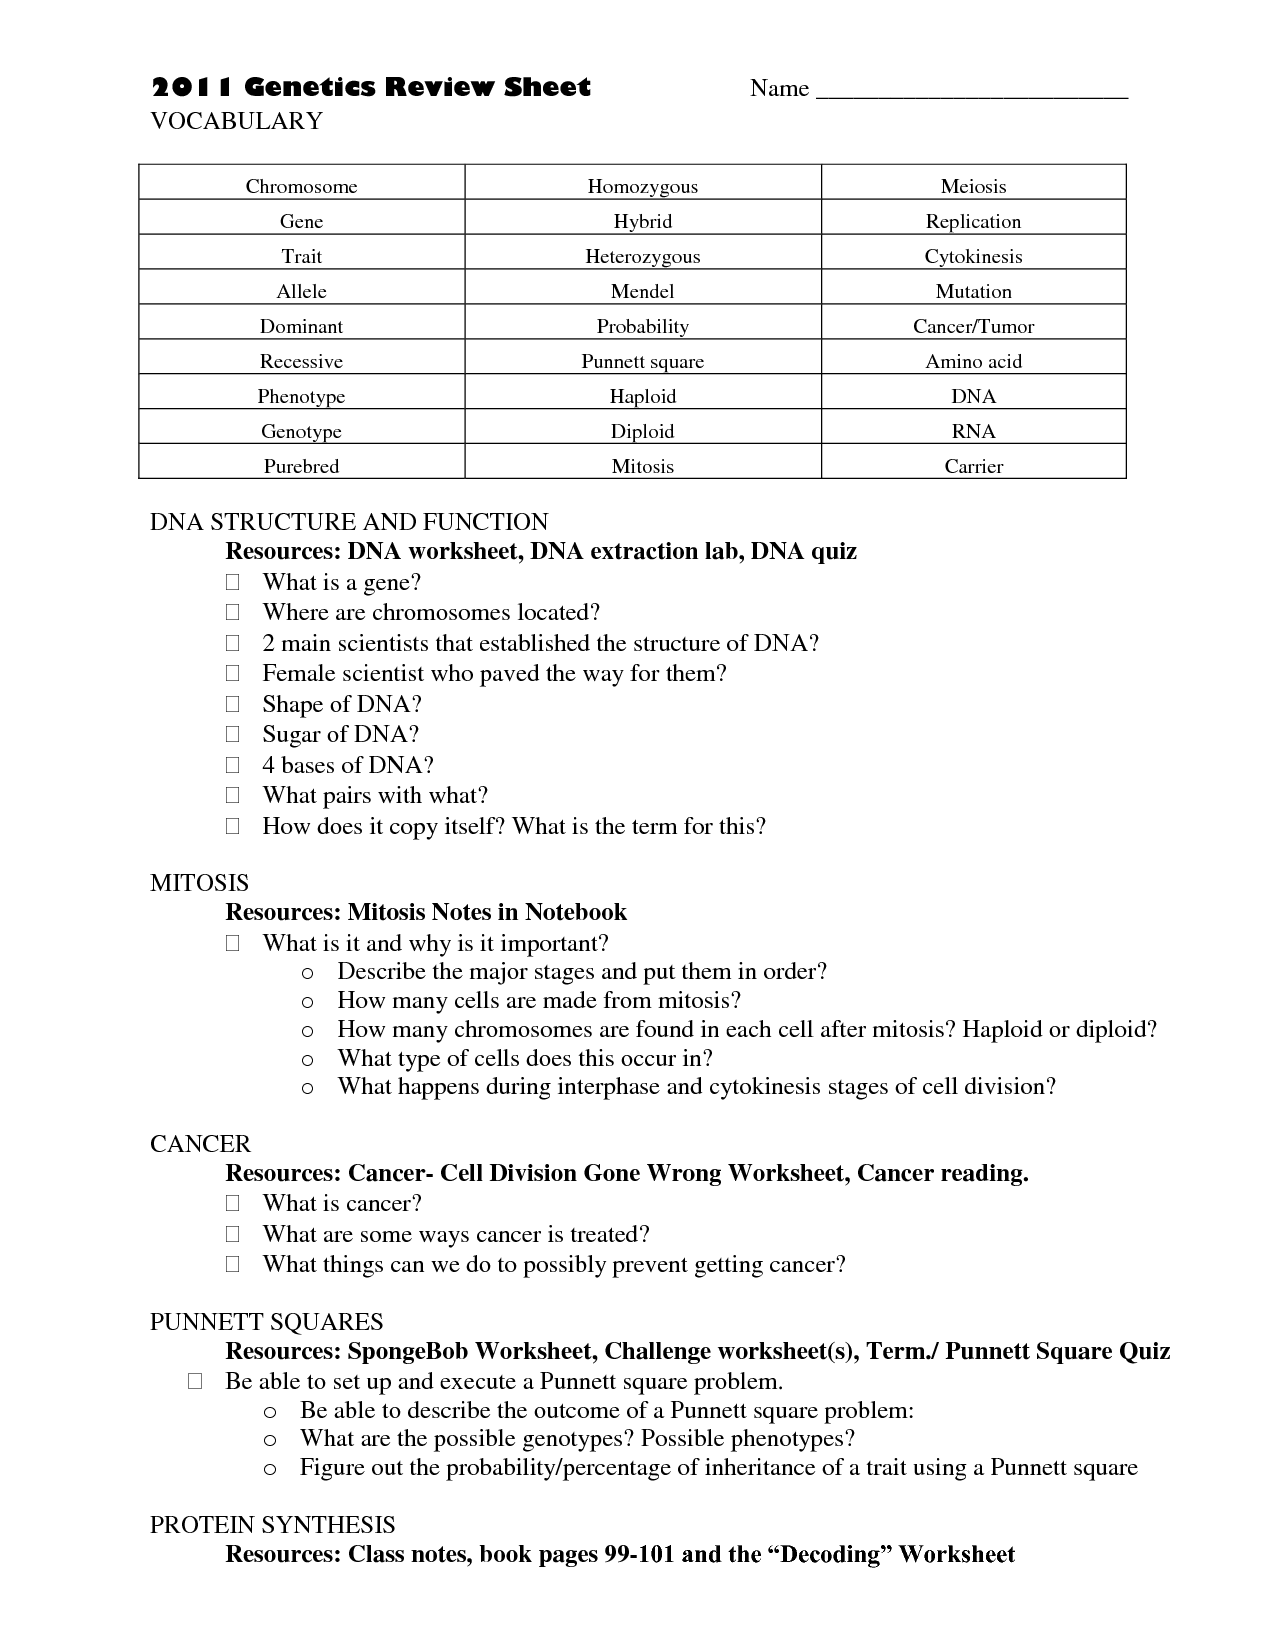 Meiosis and Mitosis Worksheet Answers